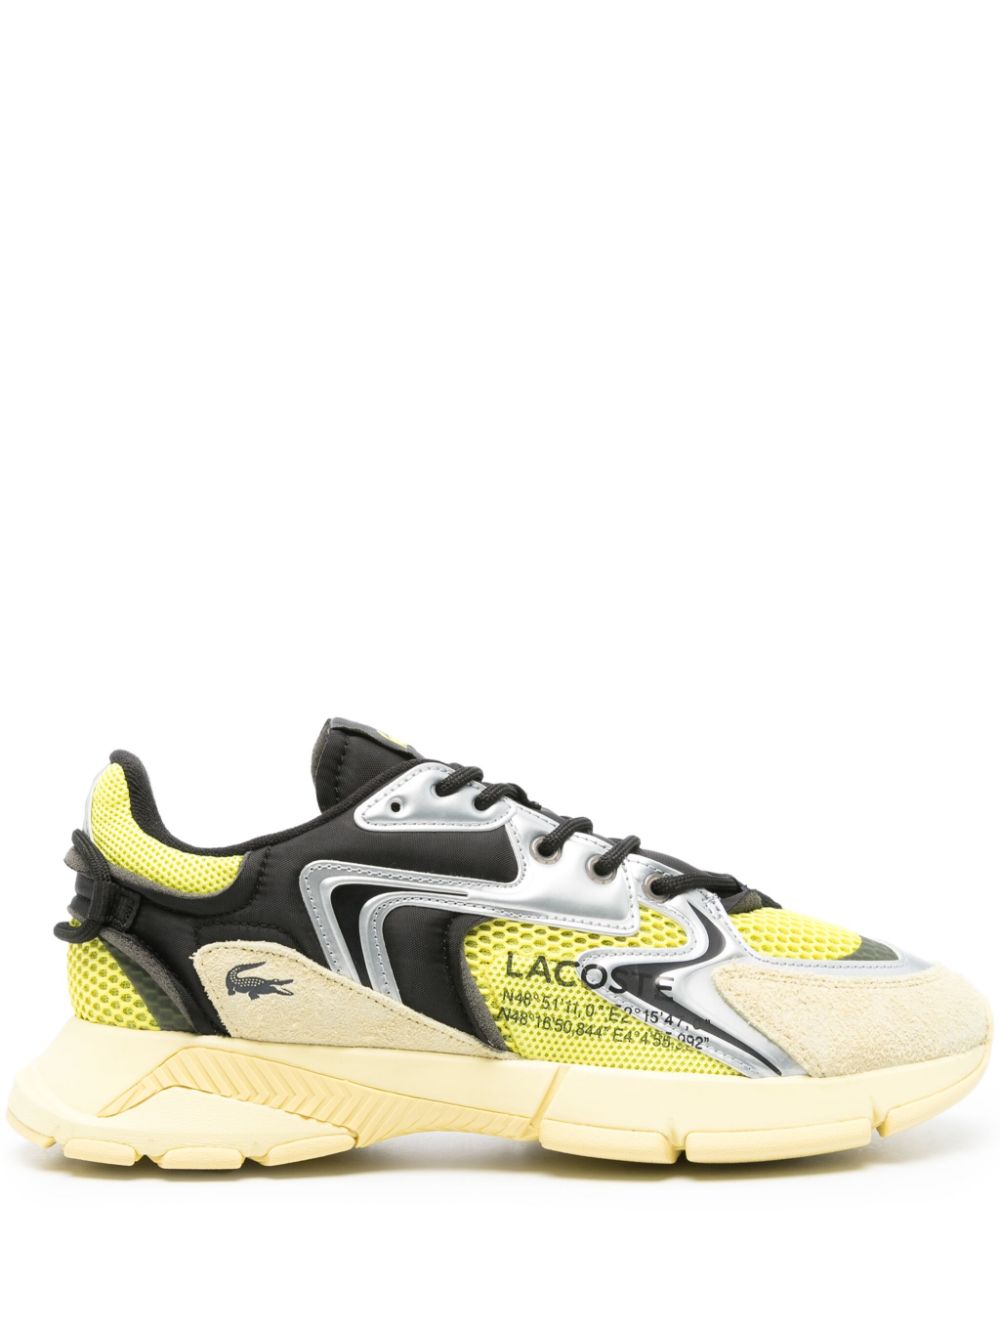 Lacoste L003 Neo panelled sneakers - Yellow von Lacoste